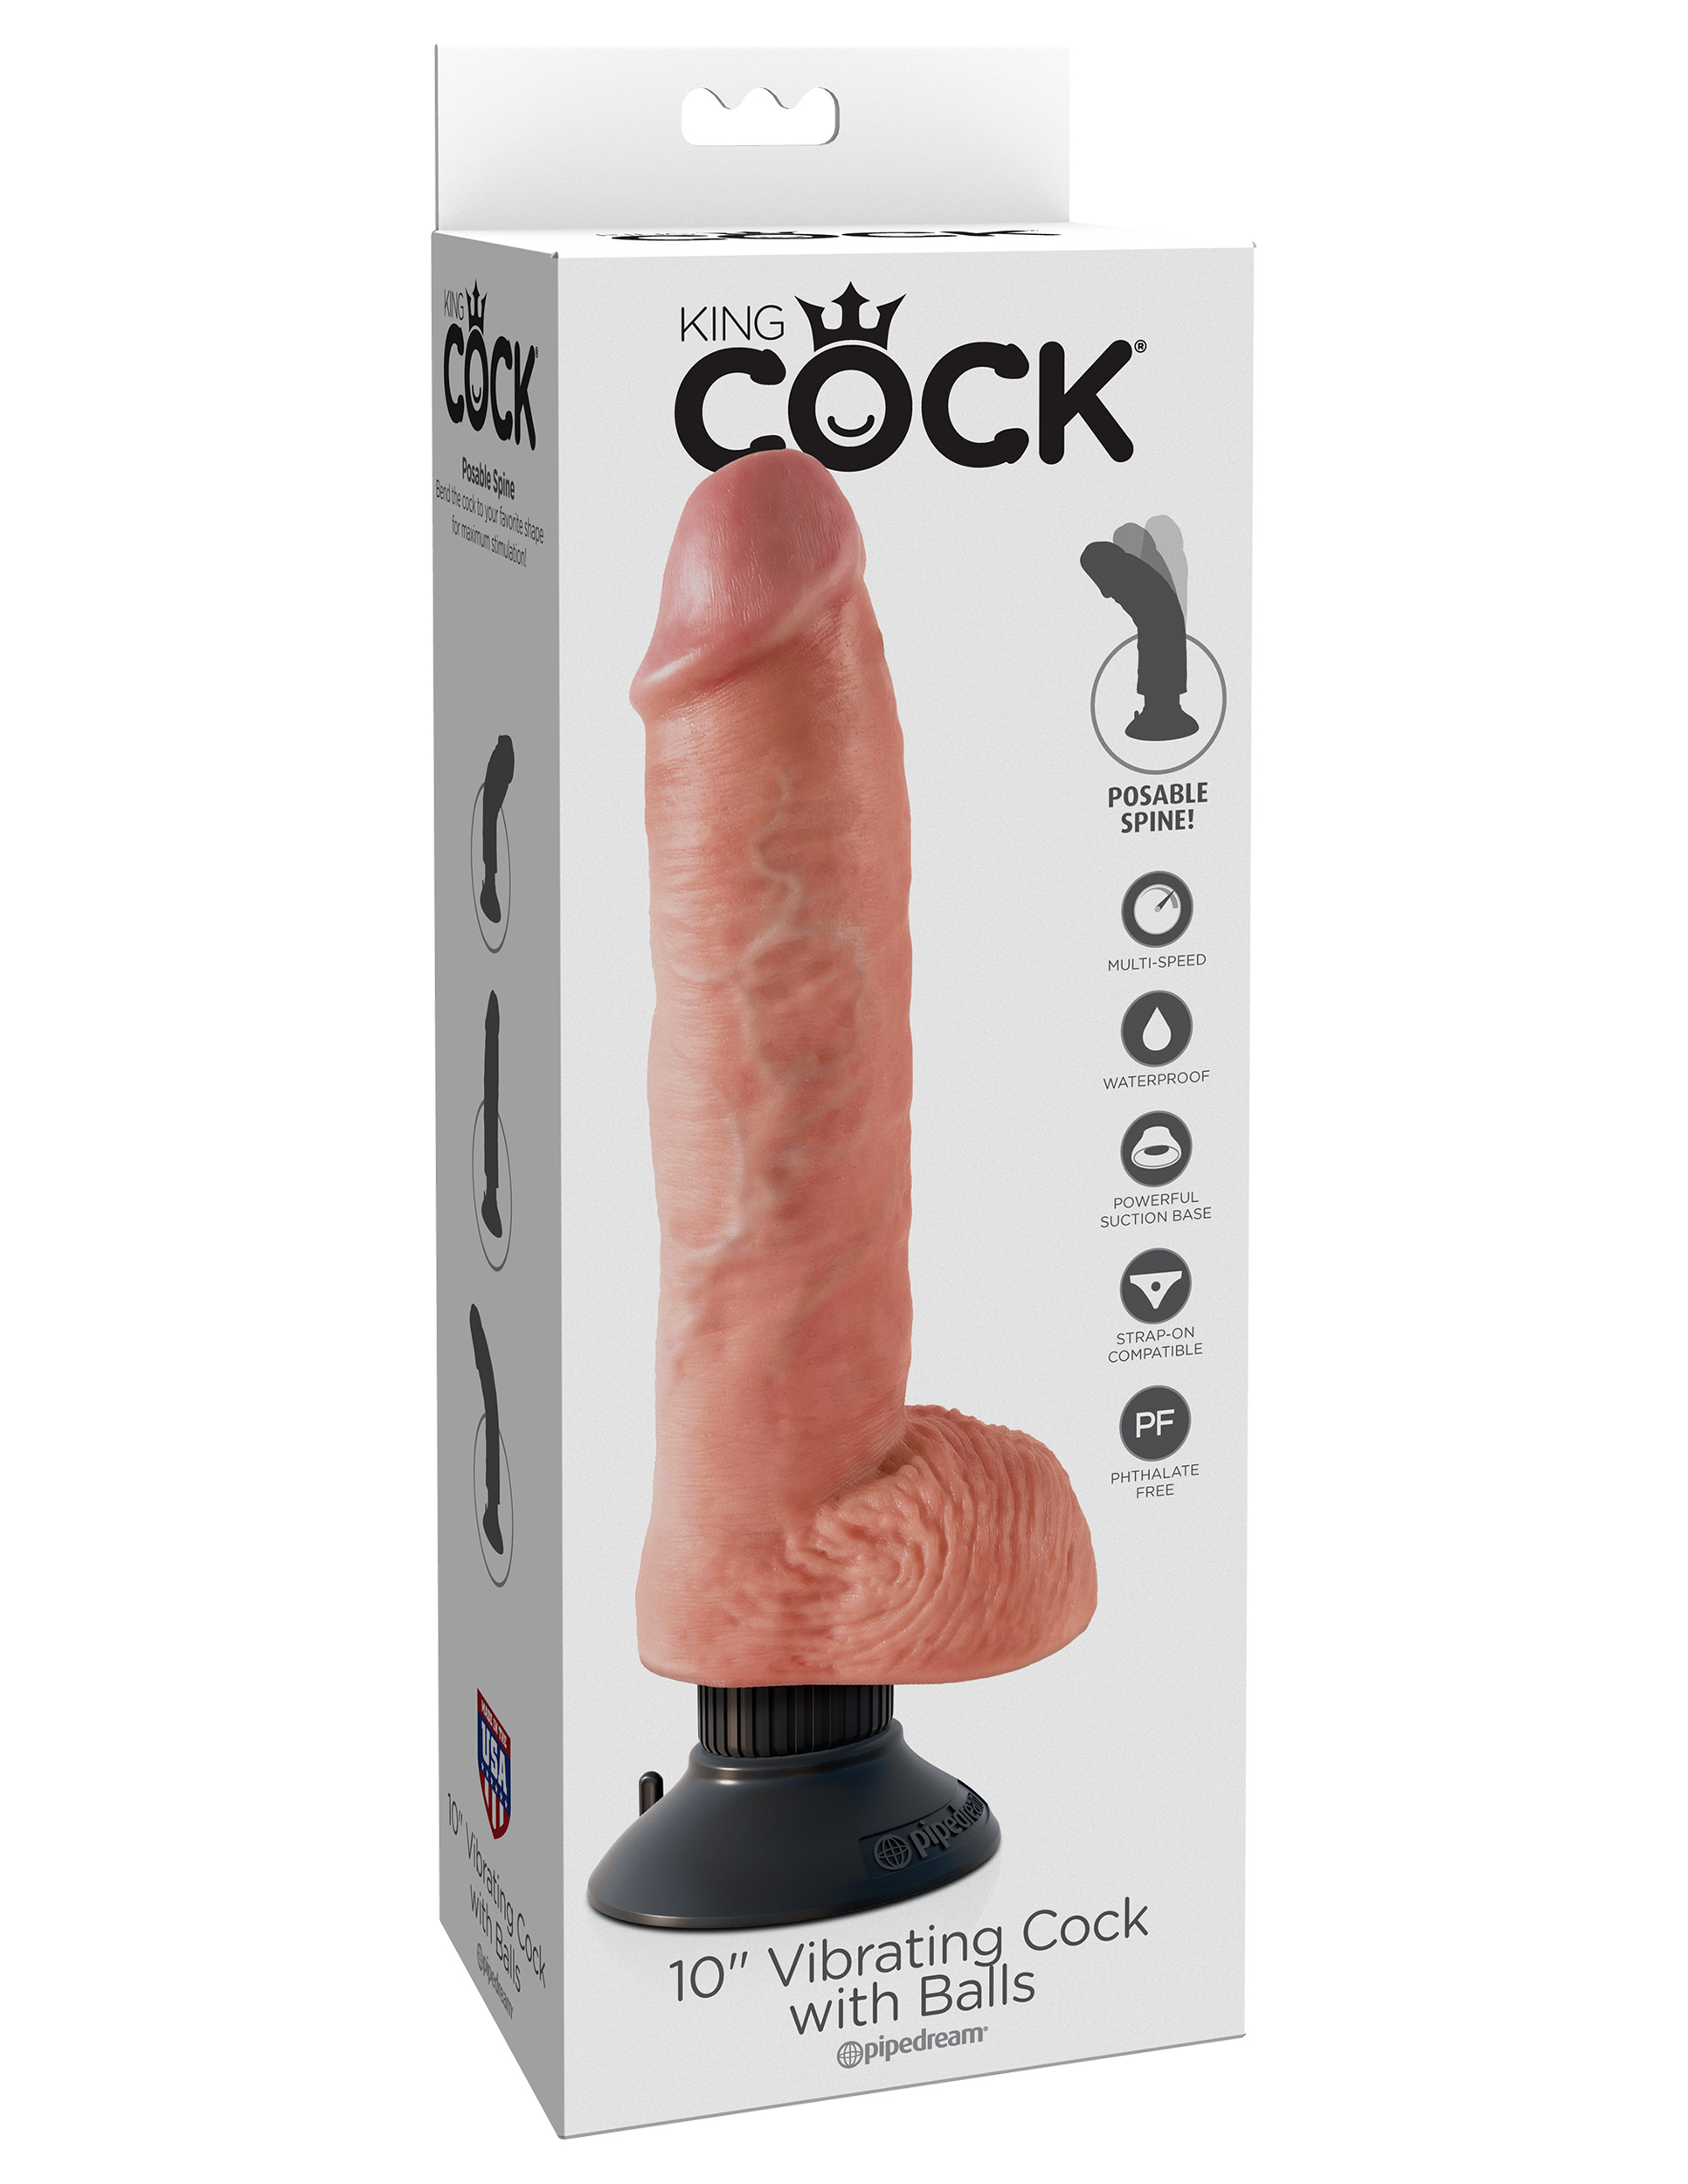  31    10 Vibrating Cock with Balls 